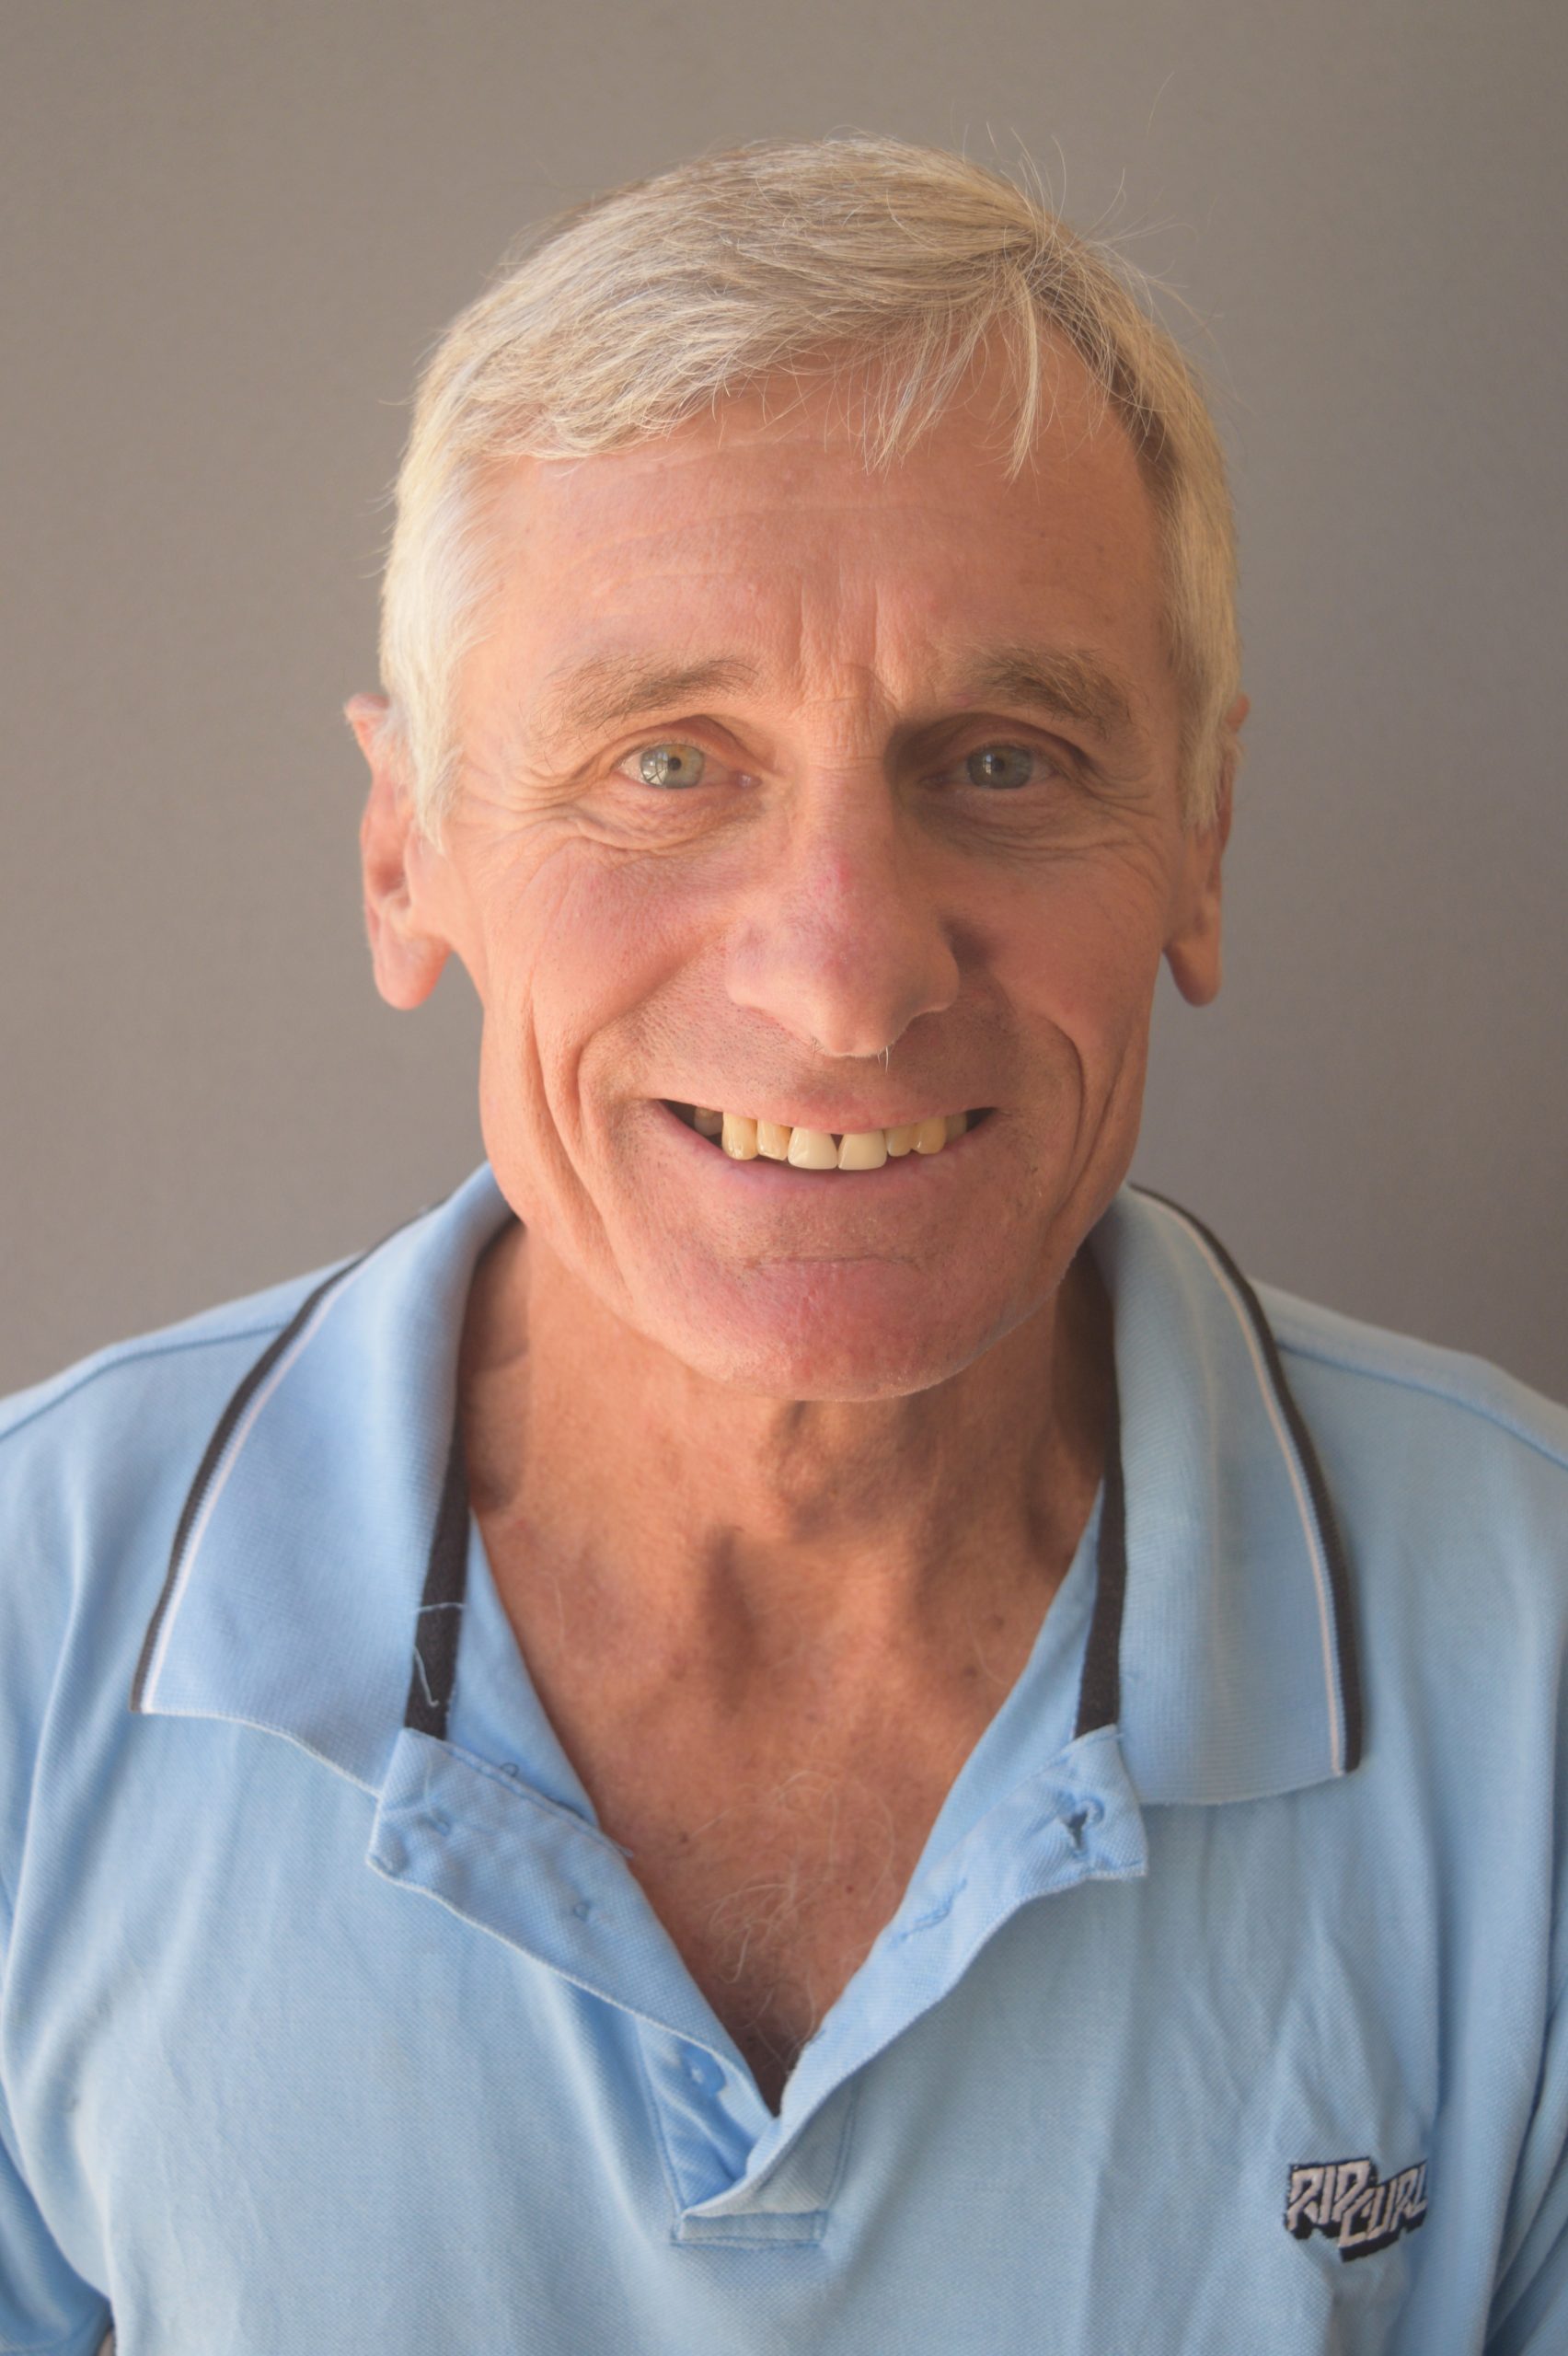 A man with white grey hair, wearing a light blue polo shirt, smiles at the camera